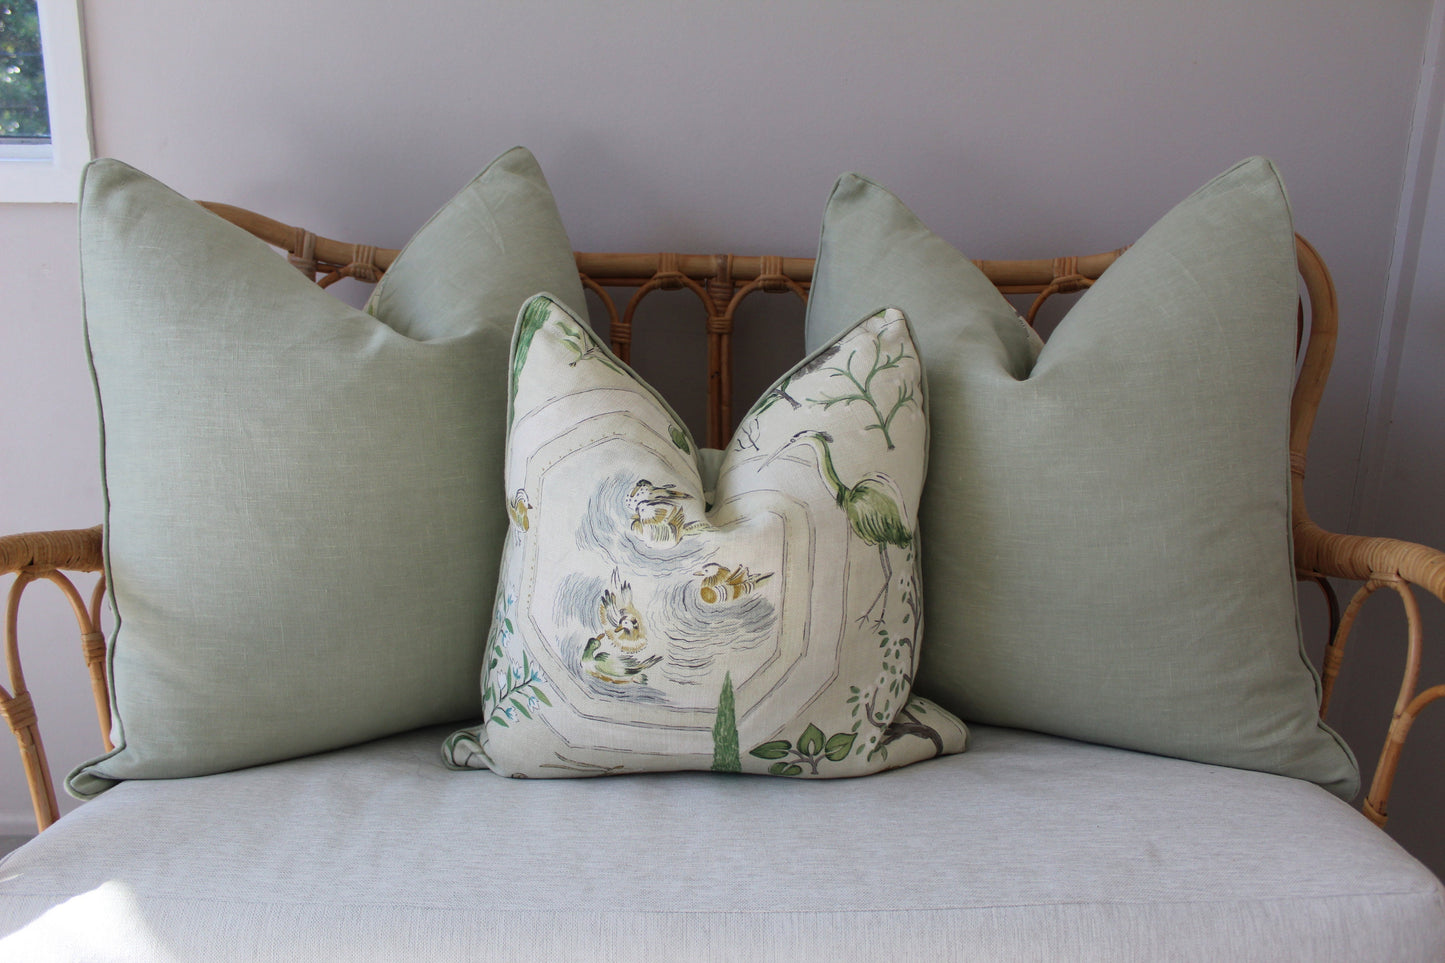 Sultan's Garden from Sanderson Cushion covers made in Australia Limited edition. Sham covers, 100% Italian linen